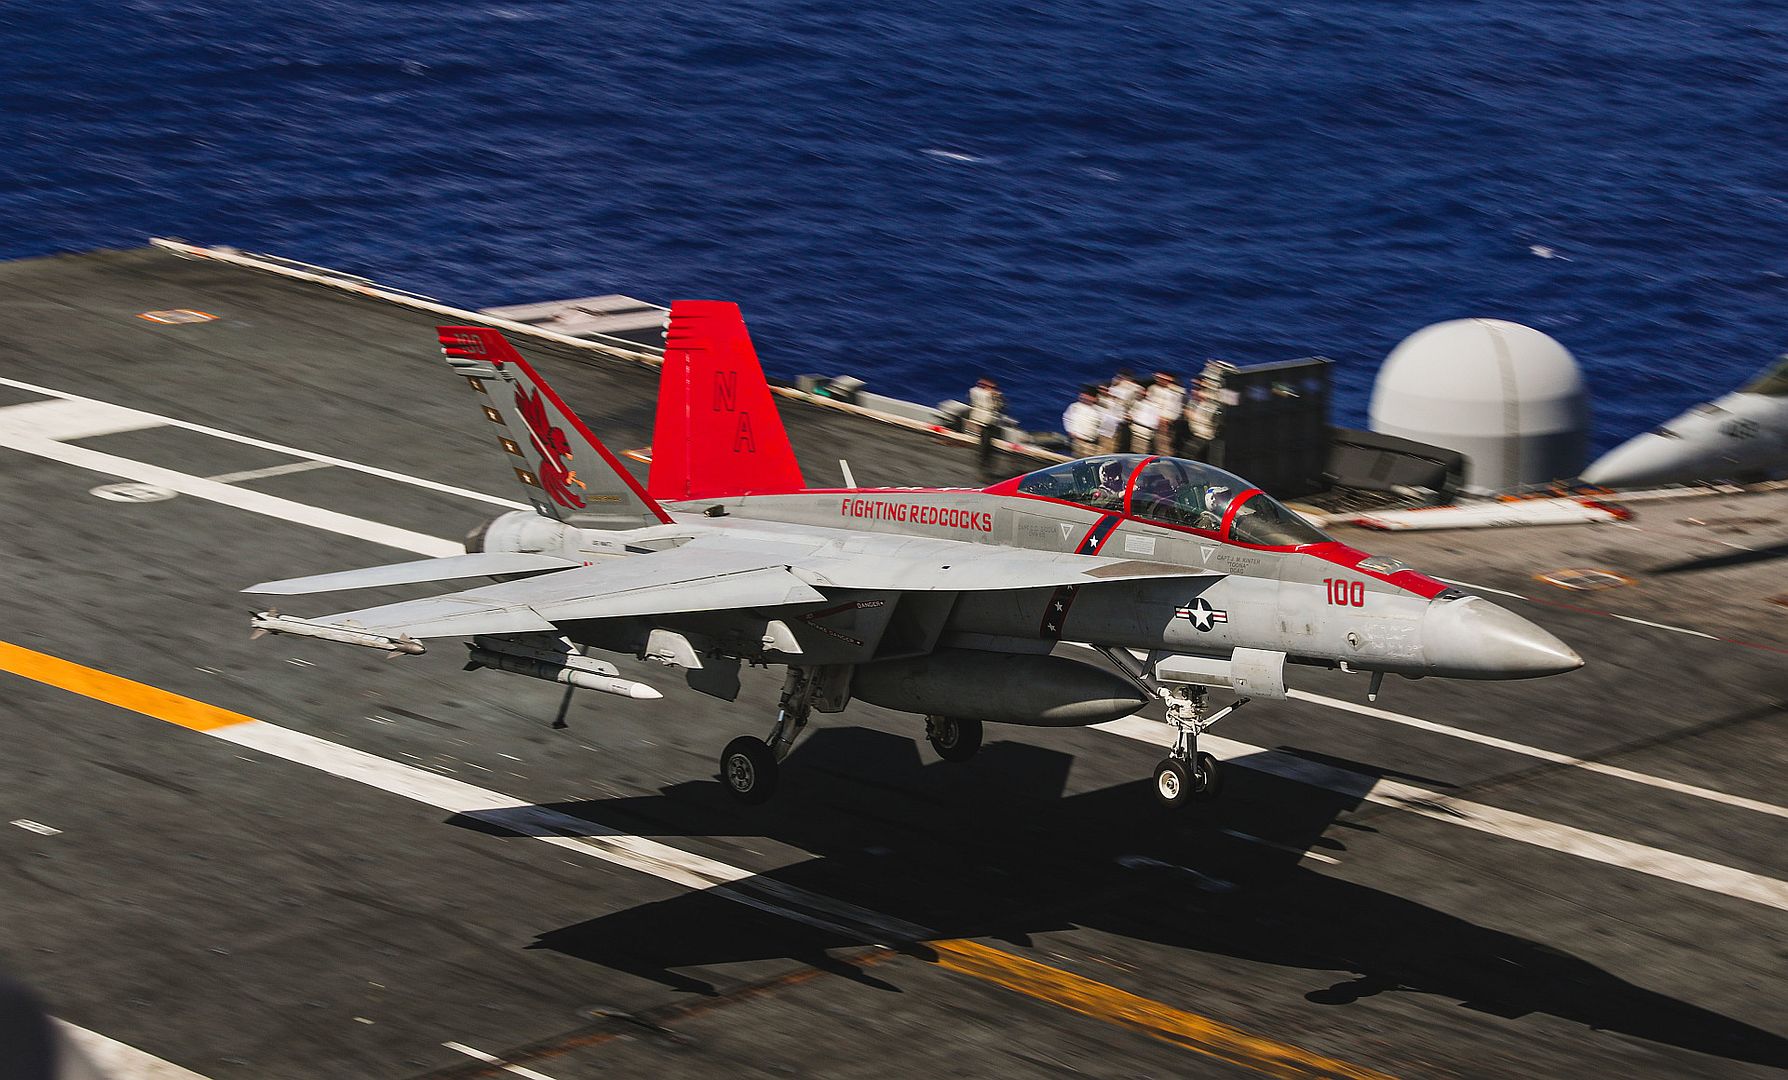 18F Super Hornet From The Fighting Redcocks Of Strike Fighter Squadron 22 Makes An Arrested Landing On The Flight Deck Of The Aircraft Carrier USS Nimitz